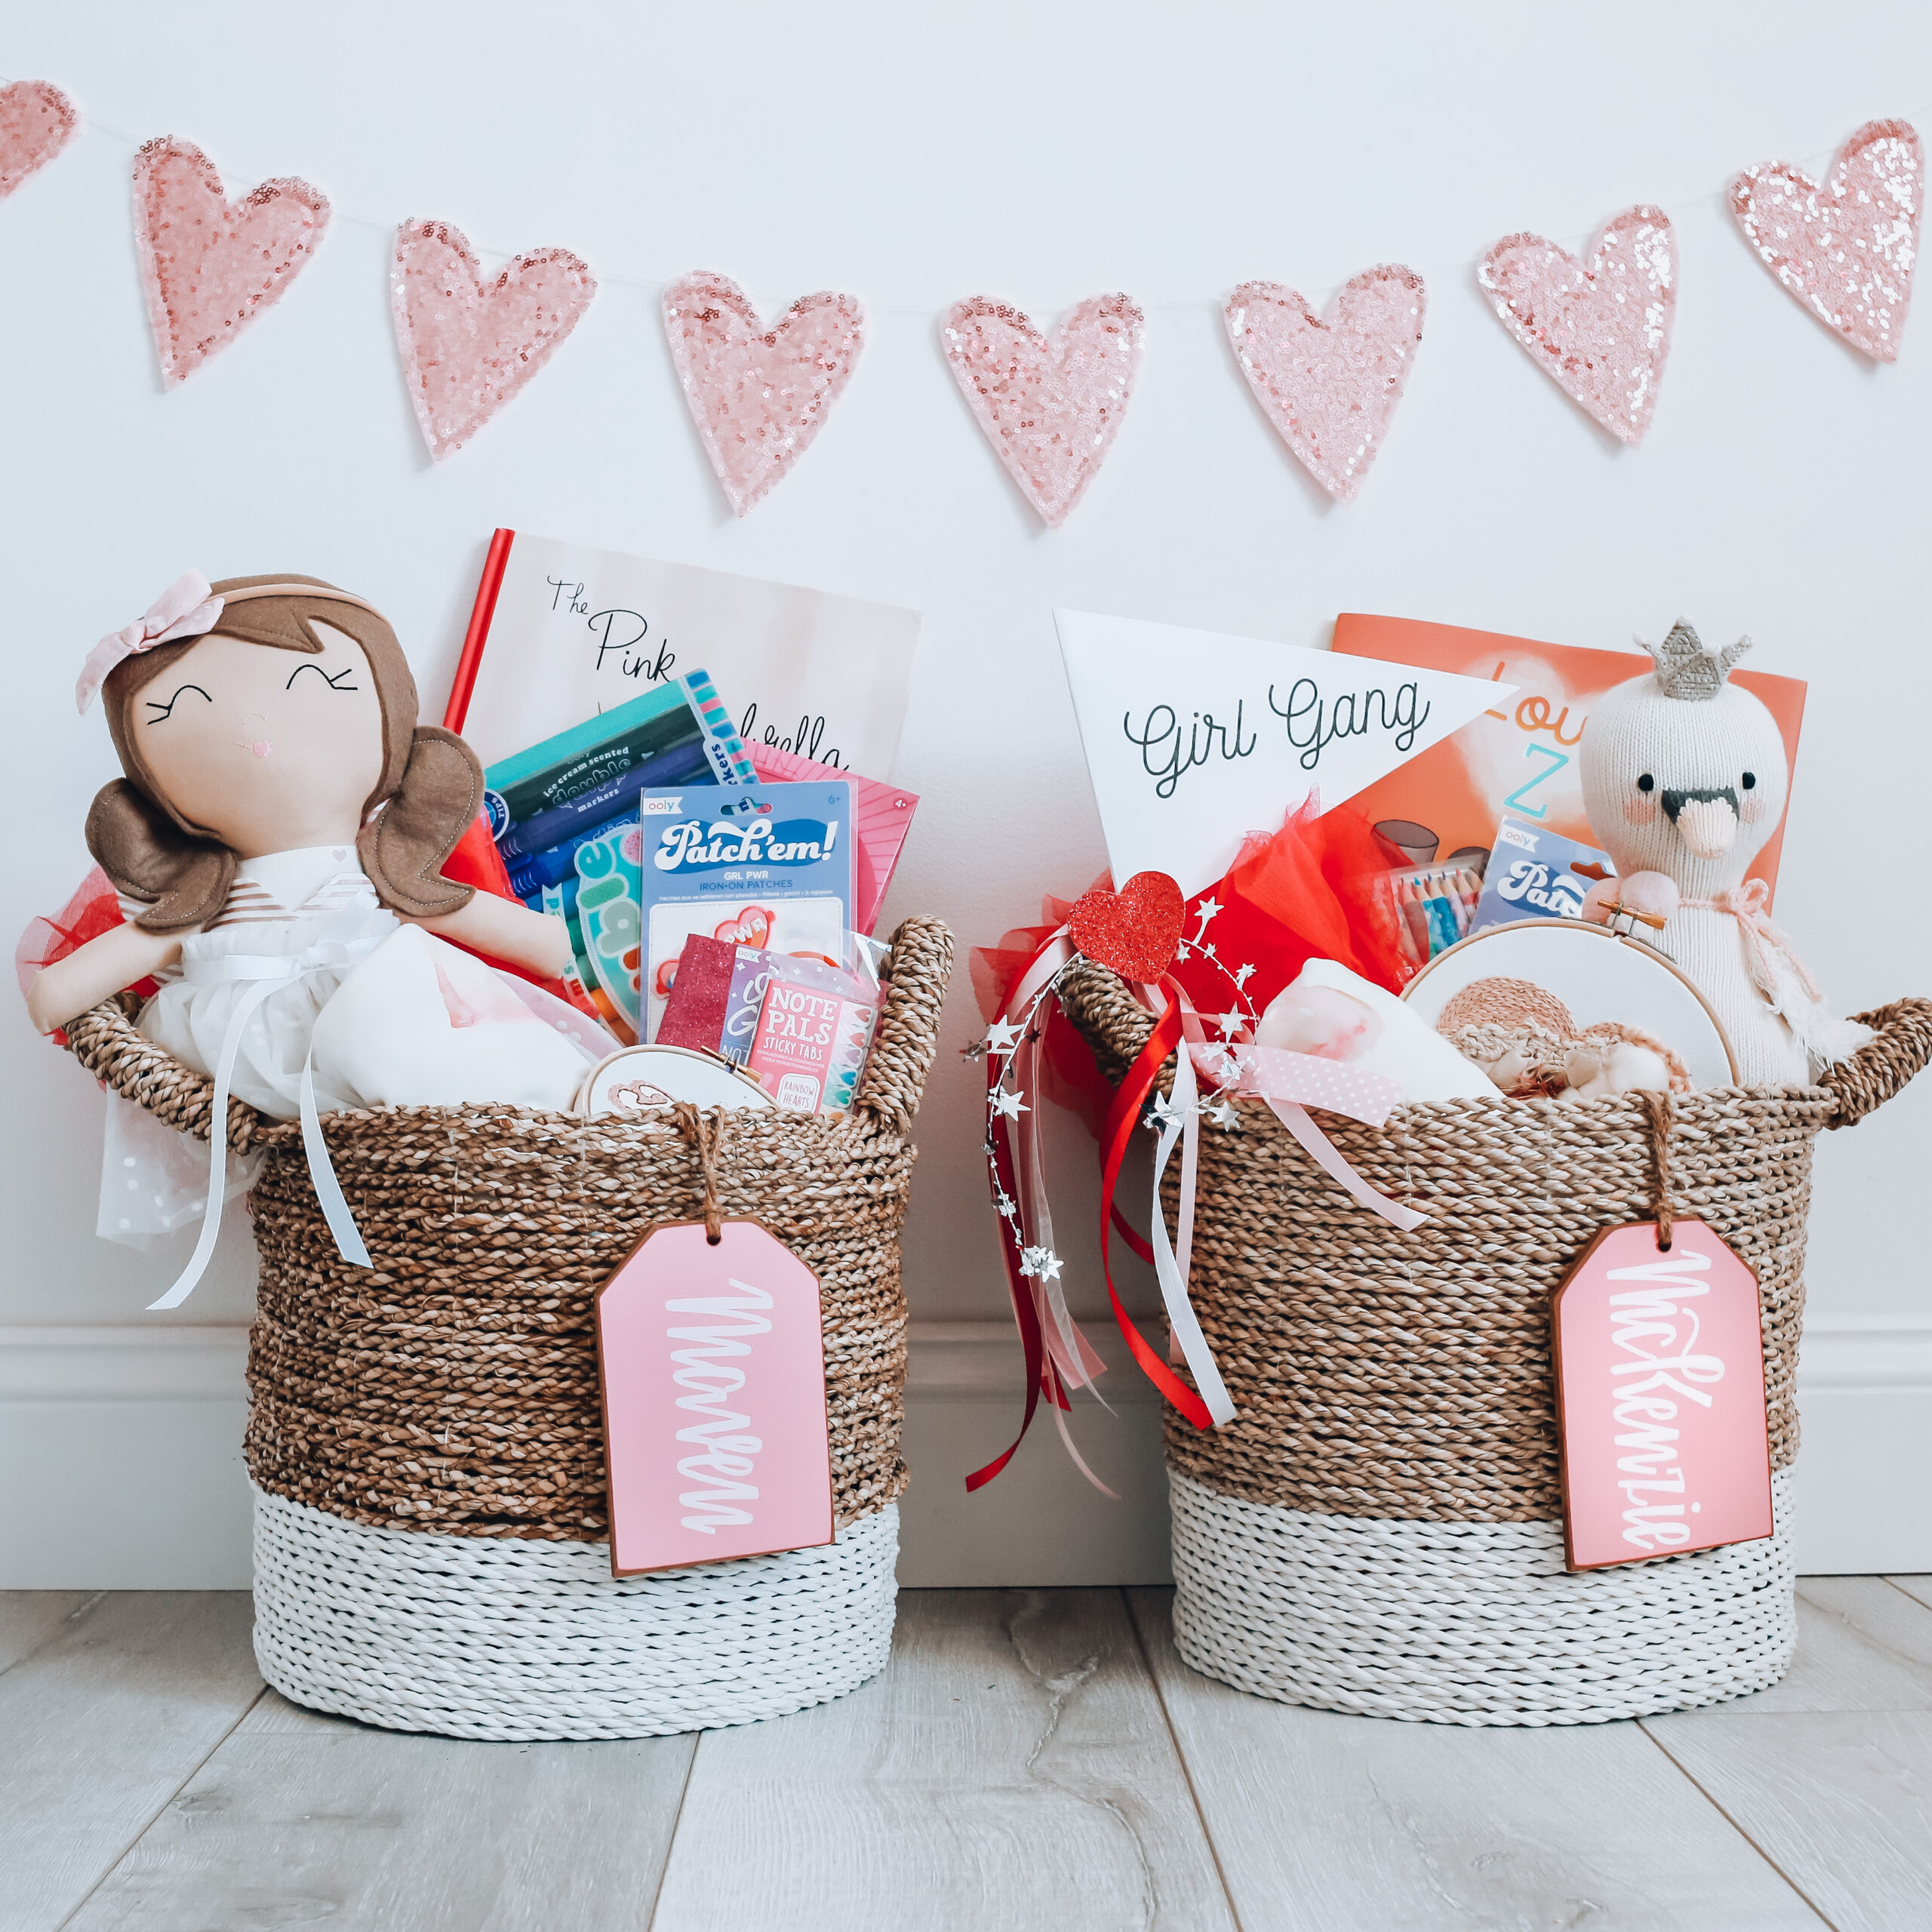 Two seagrass baskets with doll, stuffed animal and Valentine candy with two pink name tags.